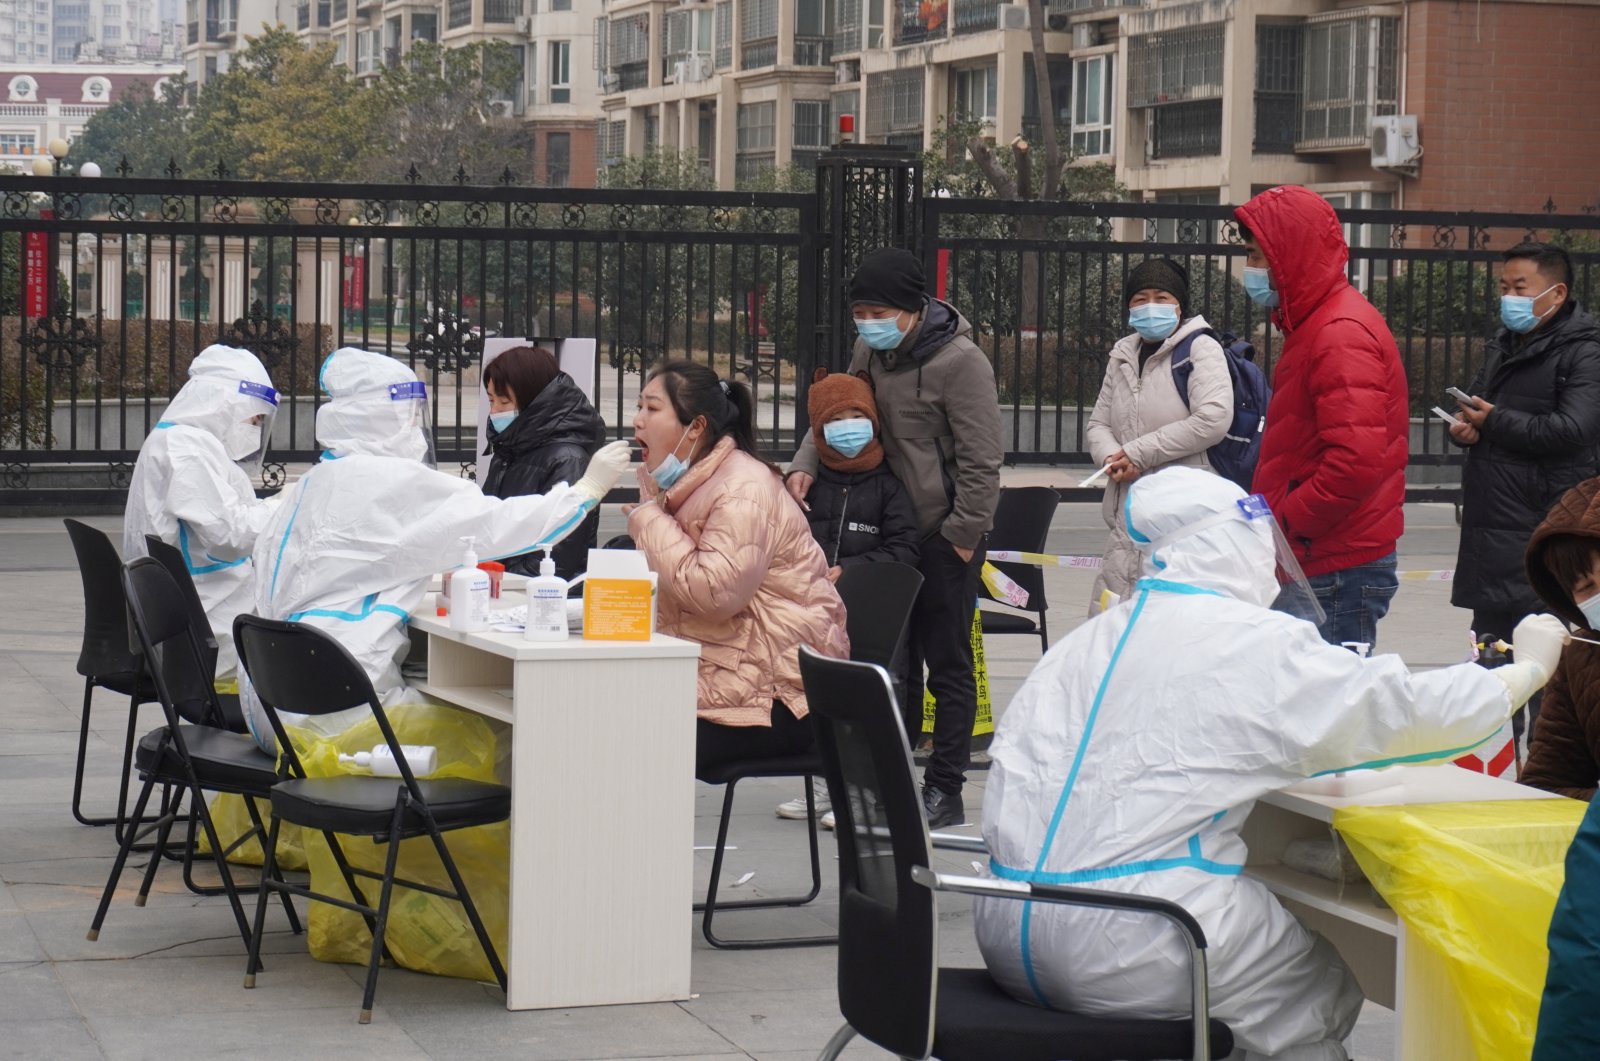 Residents line up for nucleic acid testing following cases of the coronavirus disease (COVID-19) in Zhengzhou, Henan province, China, Jan. 4, 2022. (Reuters Photo)